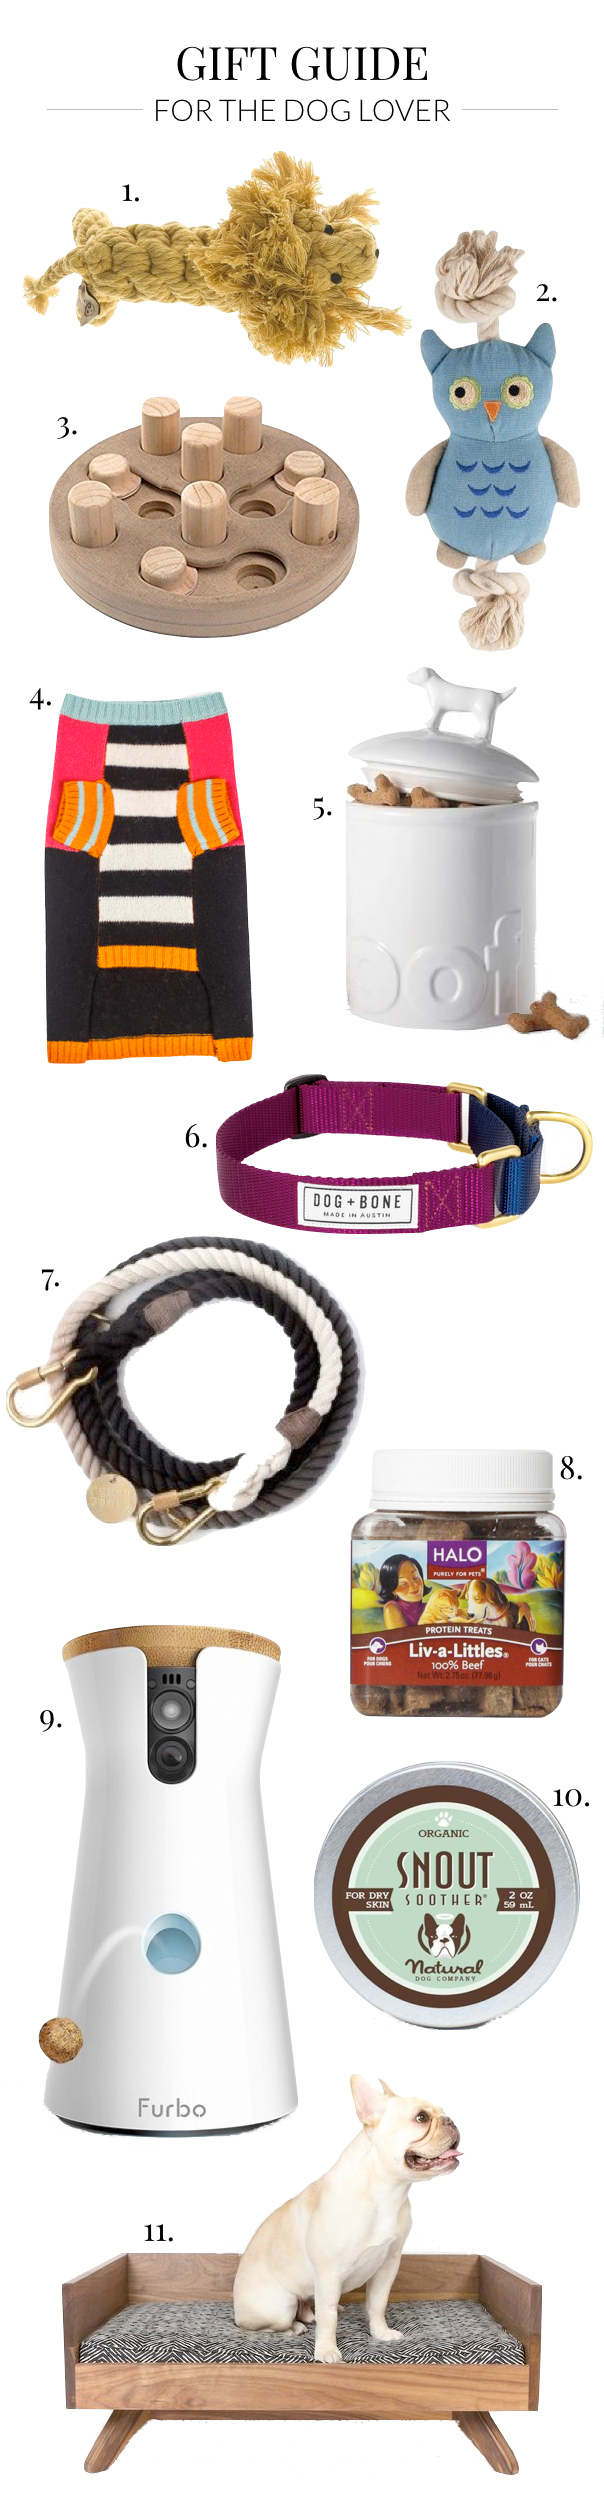 dog-lover-gifts-001